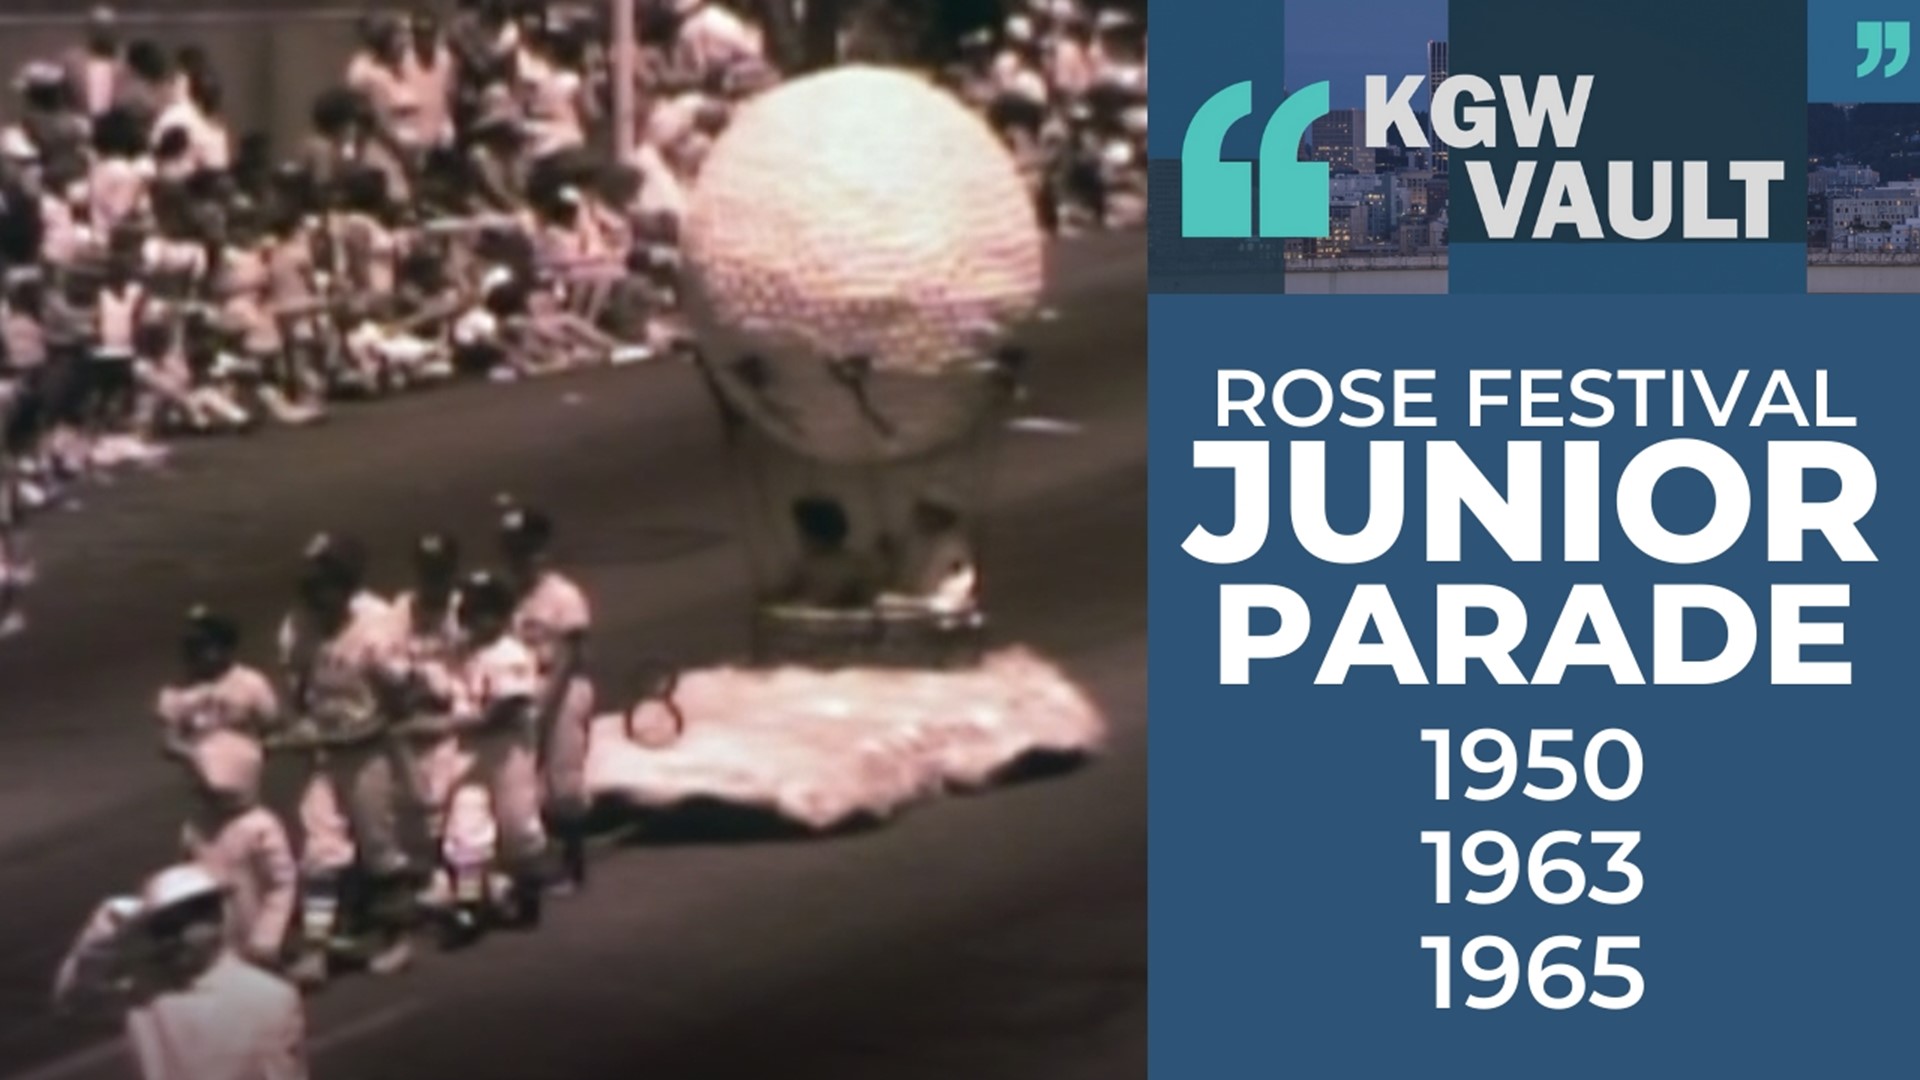 Footage from 1950, 1963 and 1965 of the Junior Parade. The Rose Festival Association says it's the oldest (since 1936) and largest children's parade in the country.